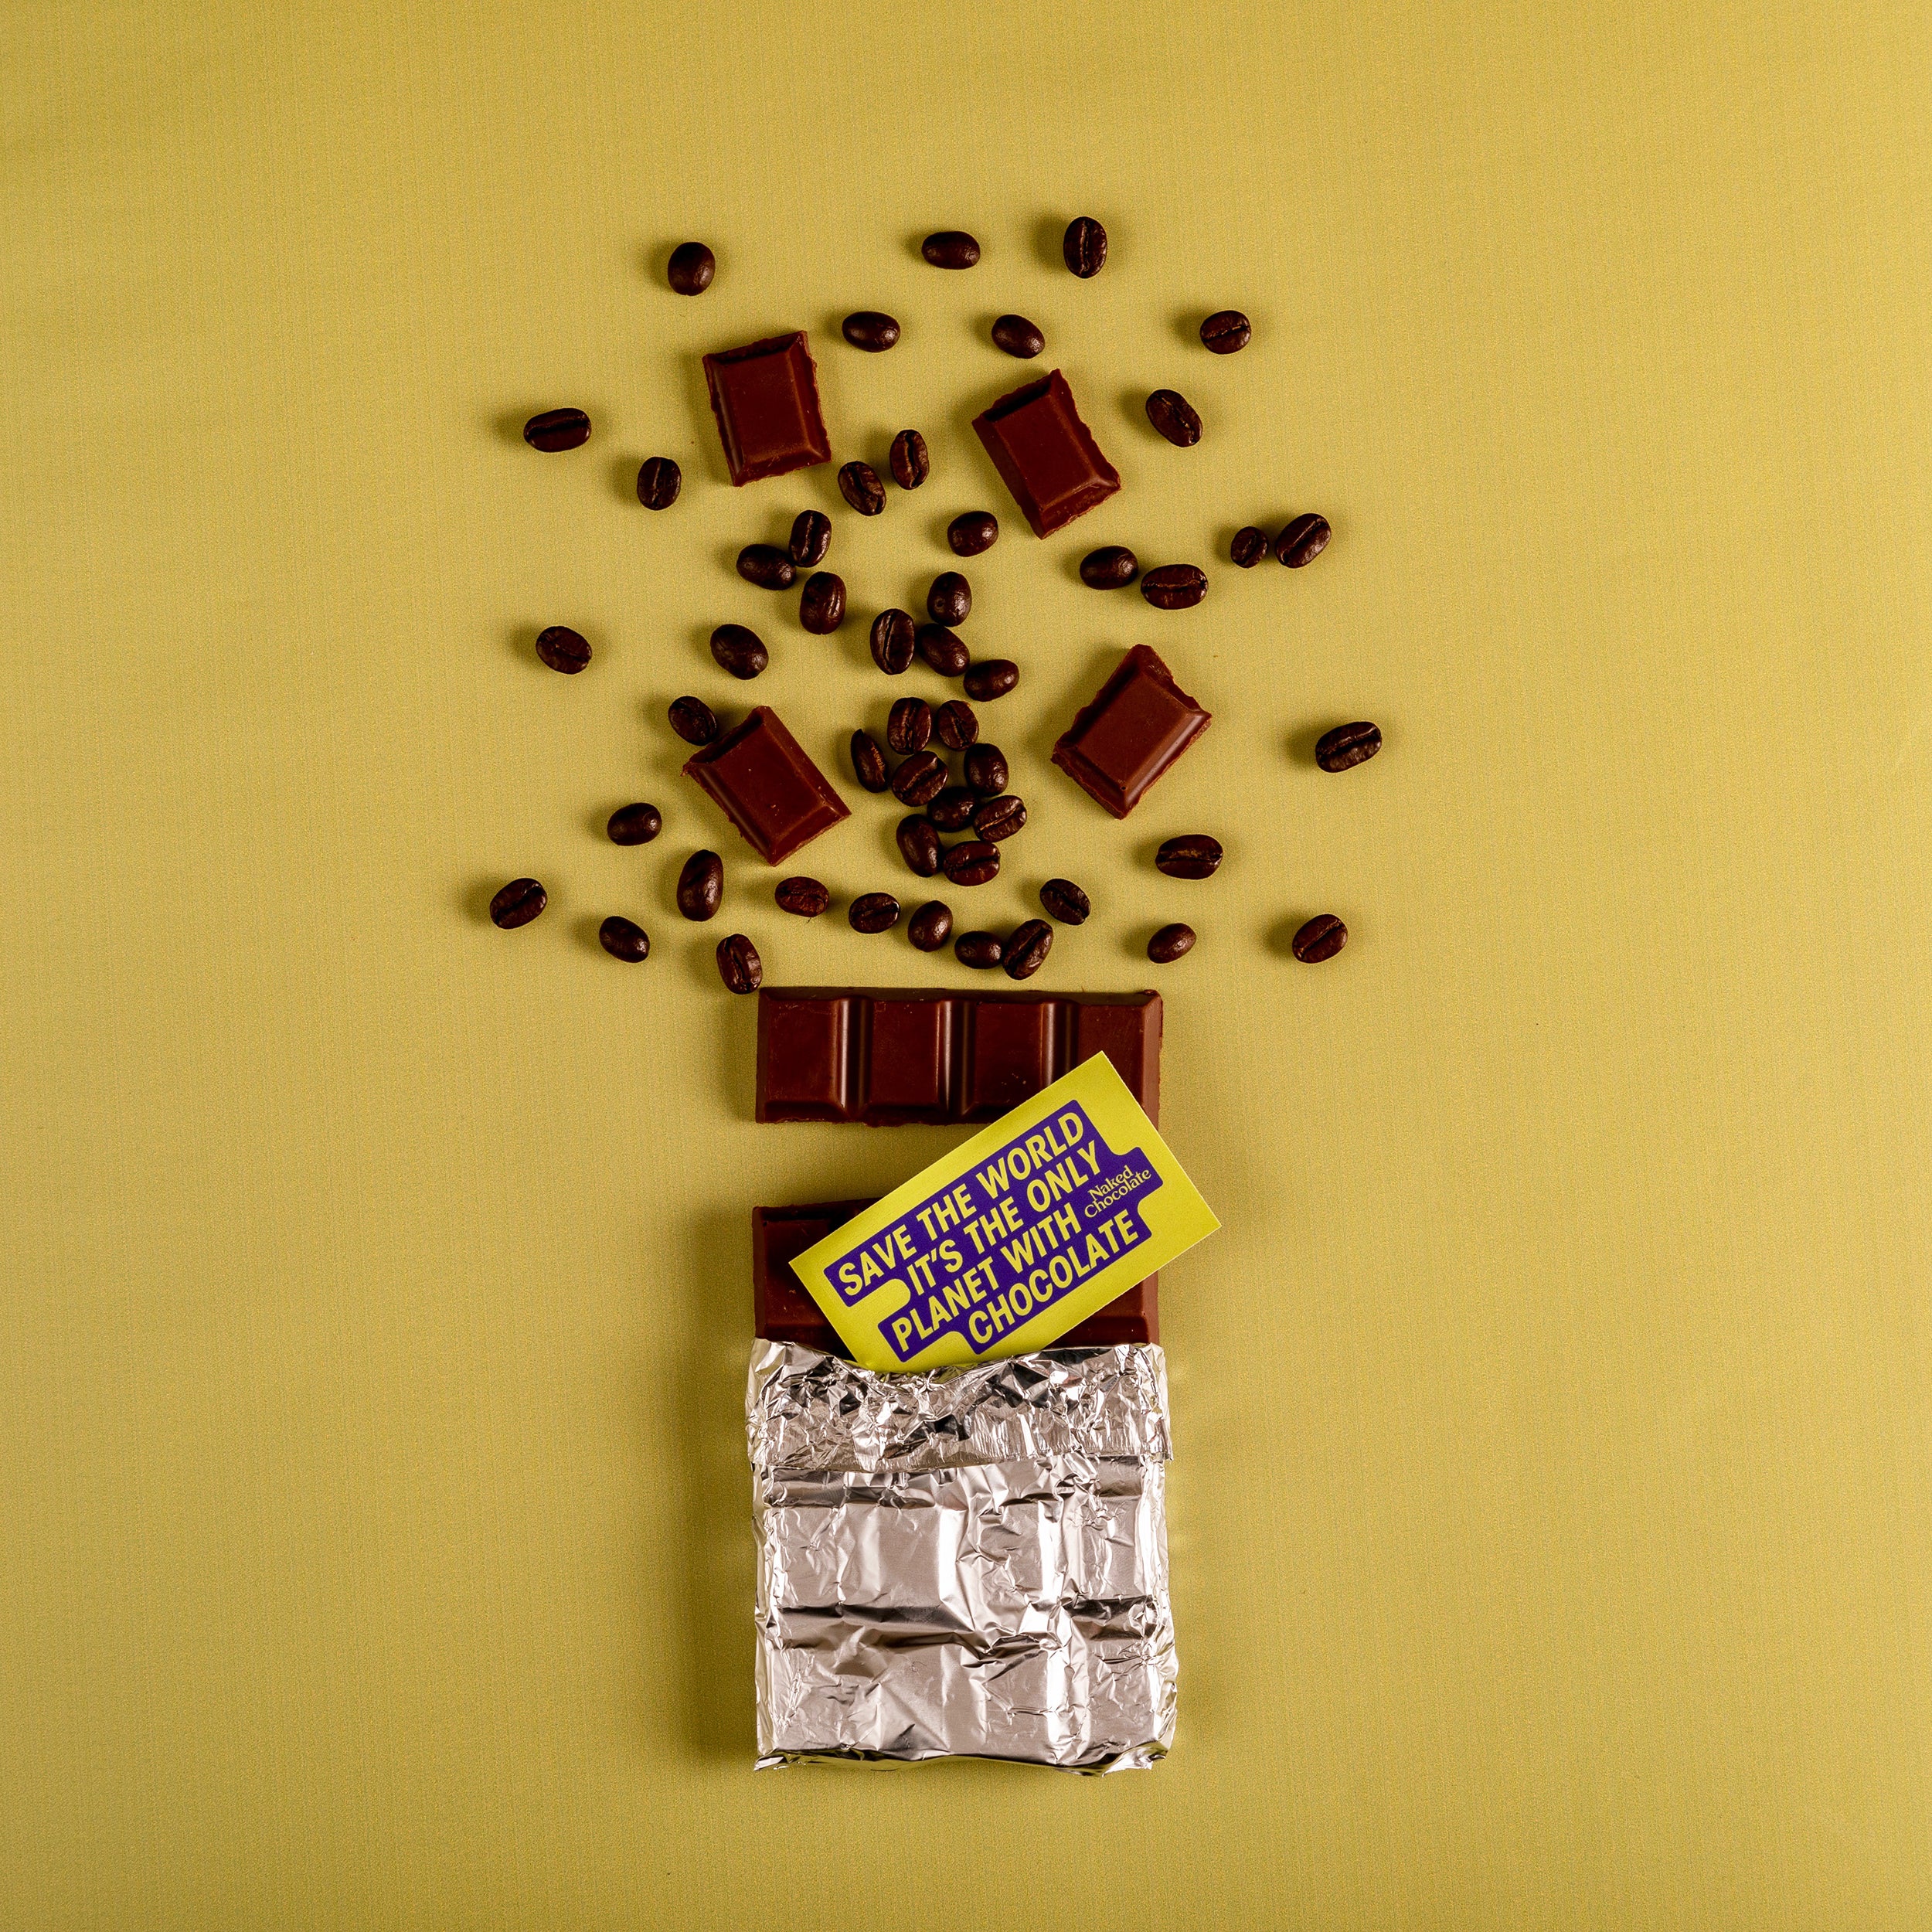 Packaging of Naked Choco